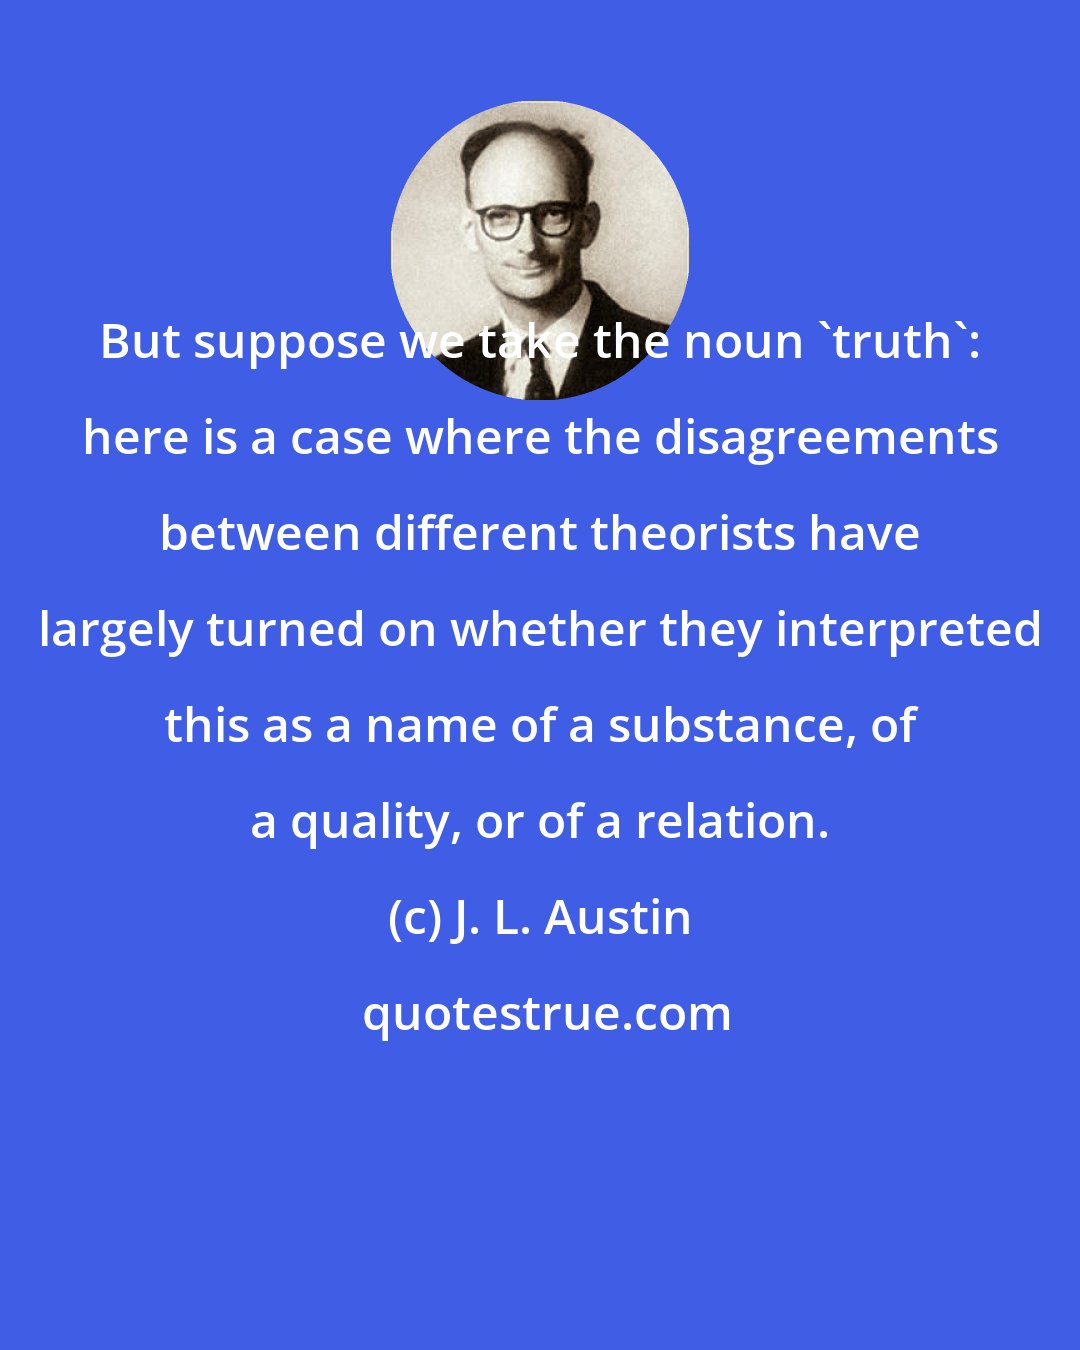 J. L. Austin: But suppose we take the noun 'truth': here is a case where the disagreements between different theorists have largely turned on whether they interpreted this as a name of a substance, of a quality, or of a relation.